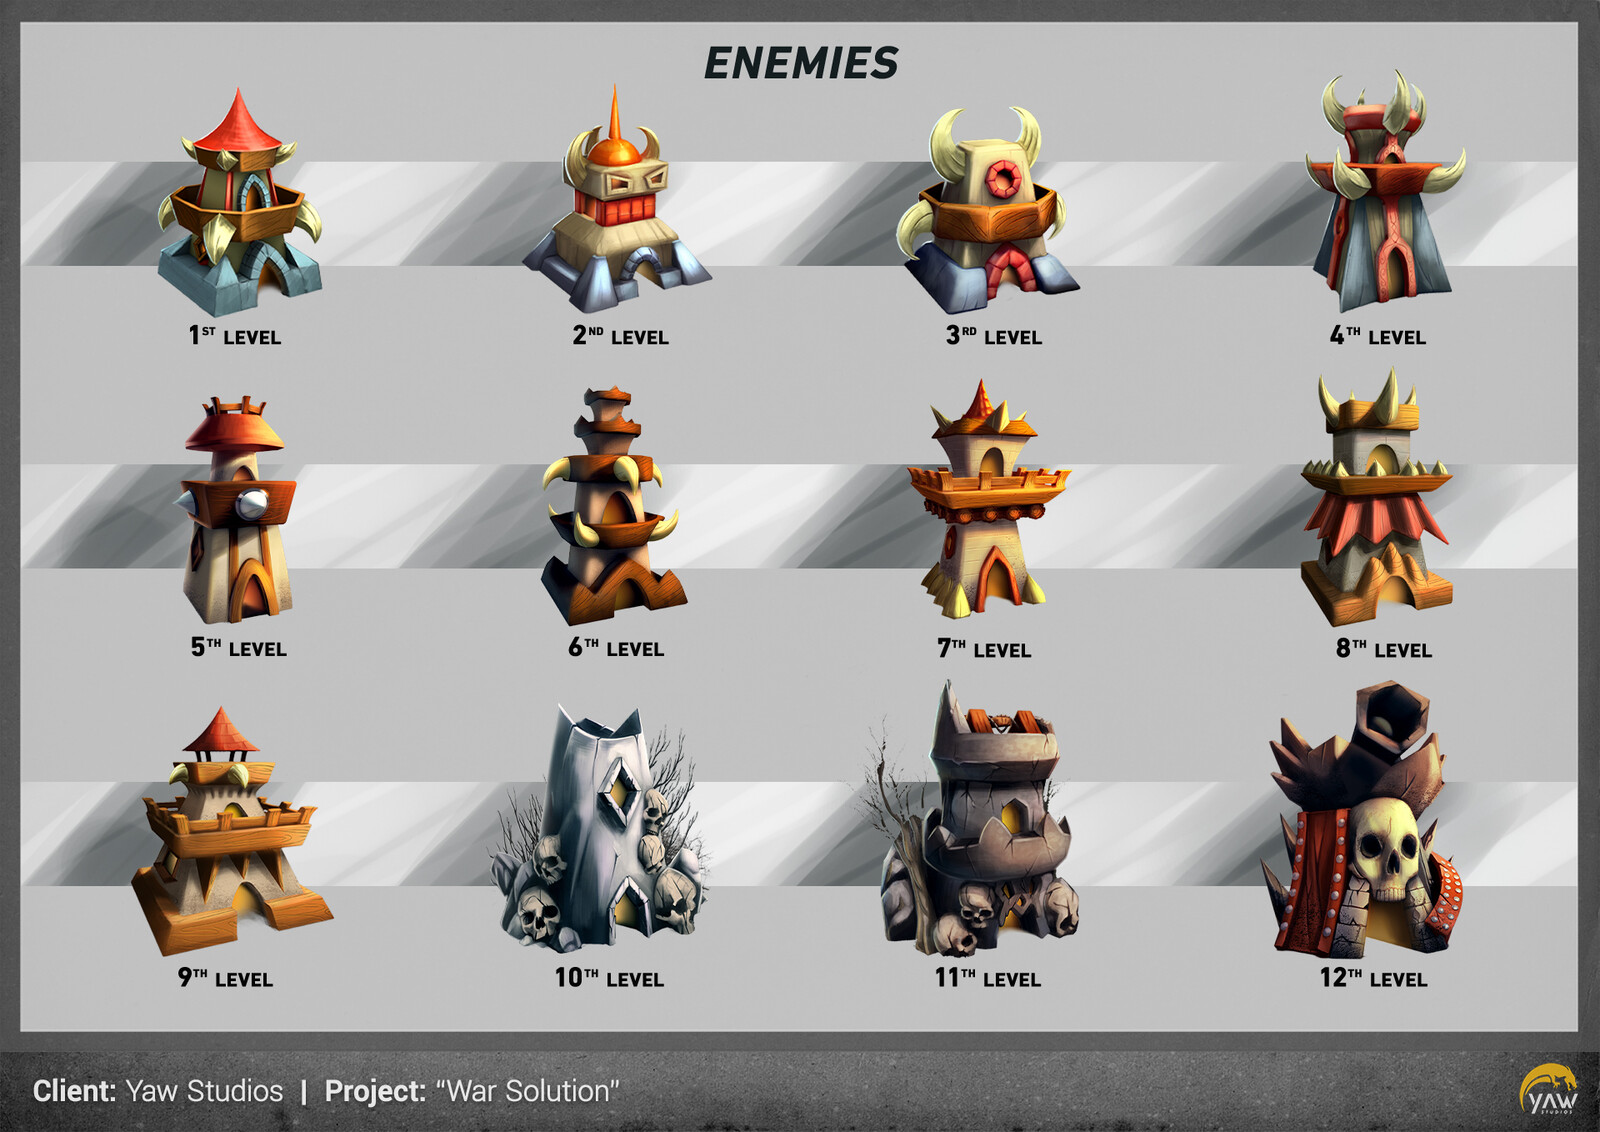 Here are the 12 enemies you will face in the first world of the game!